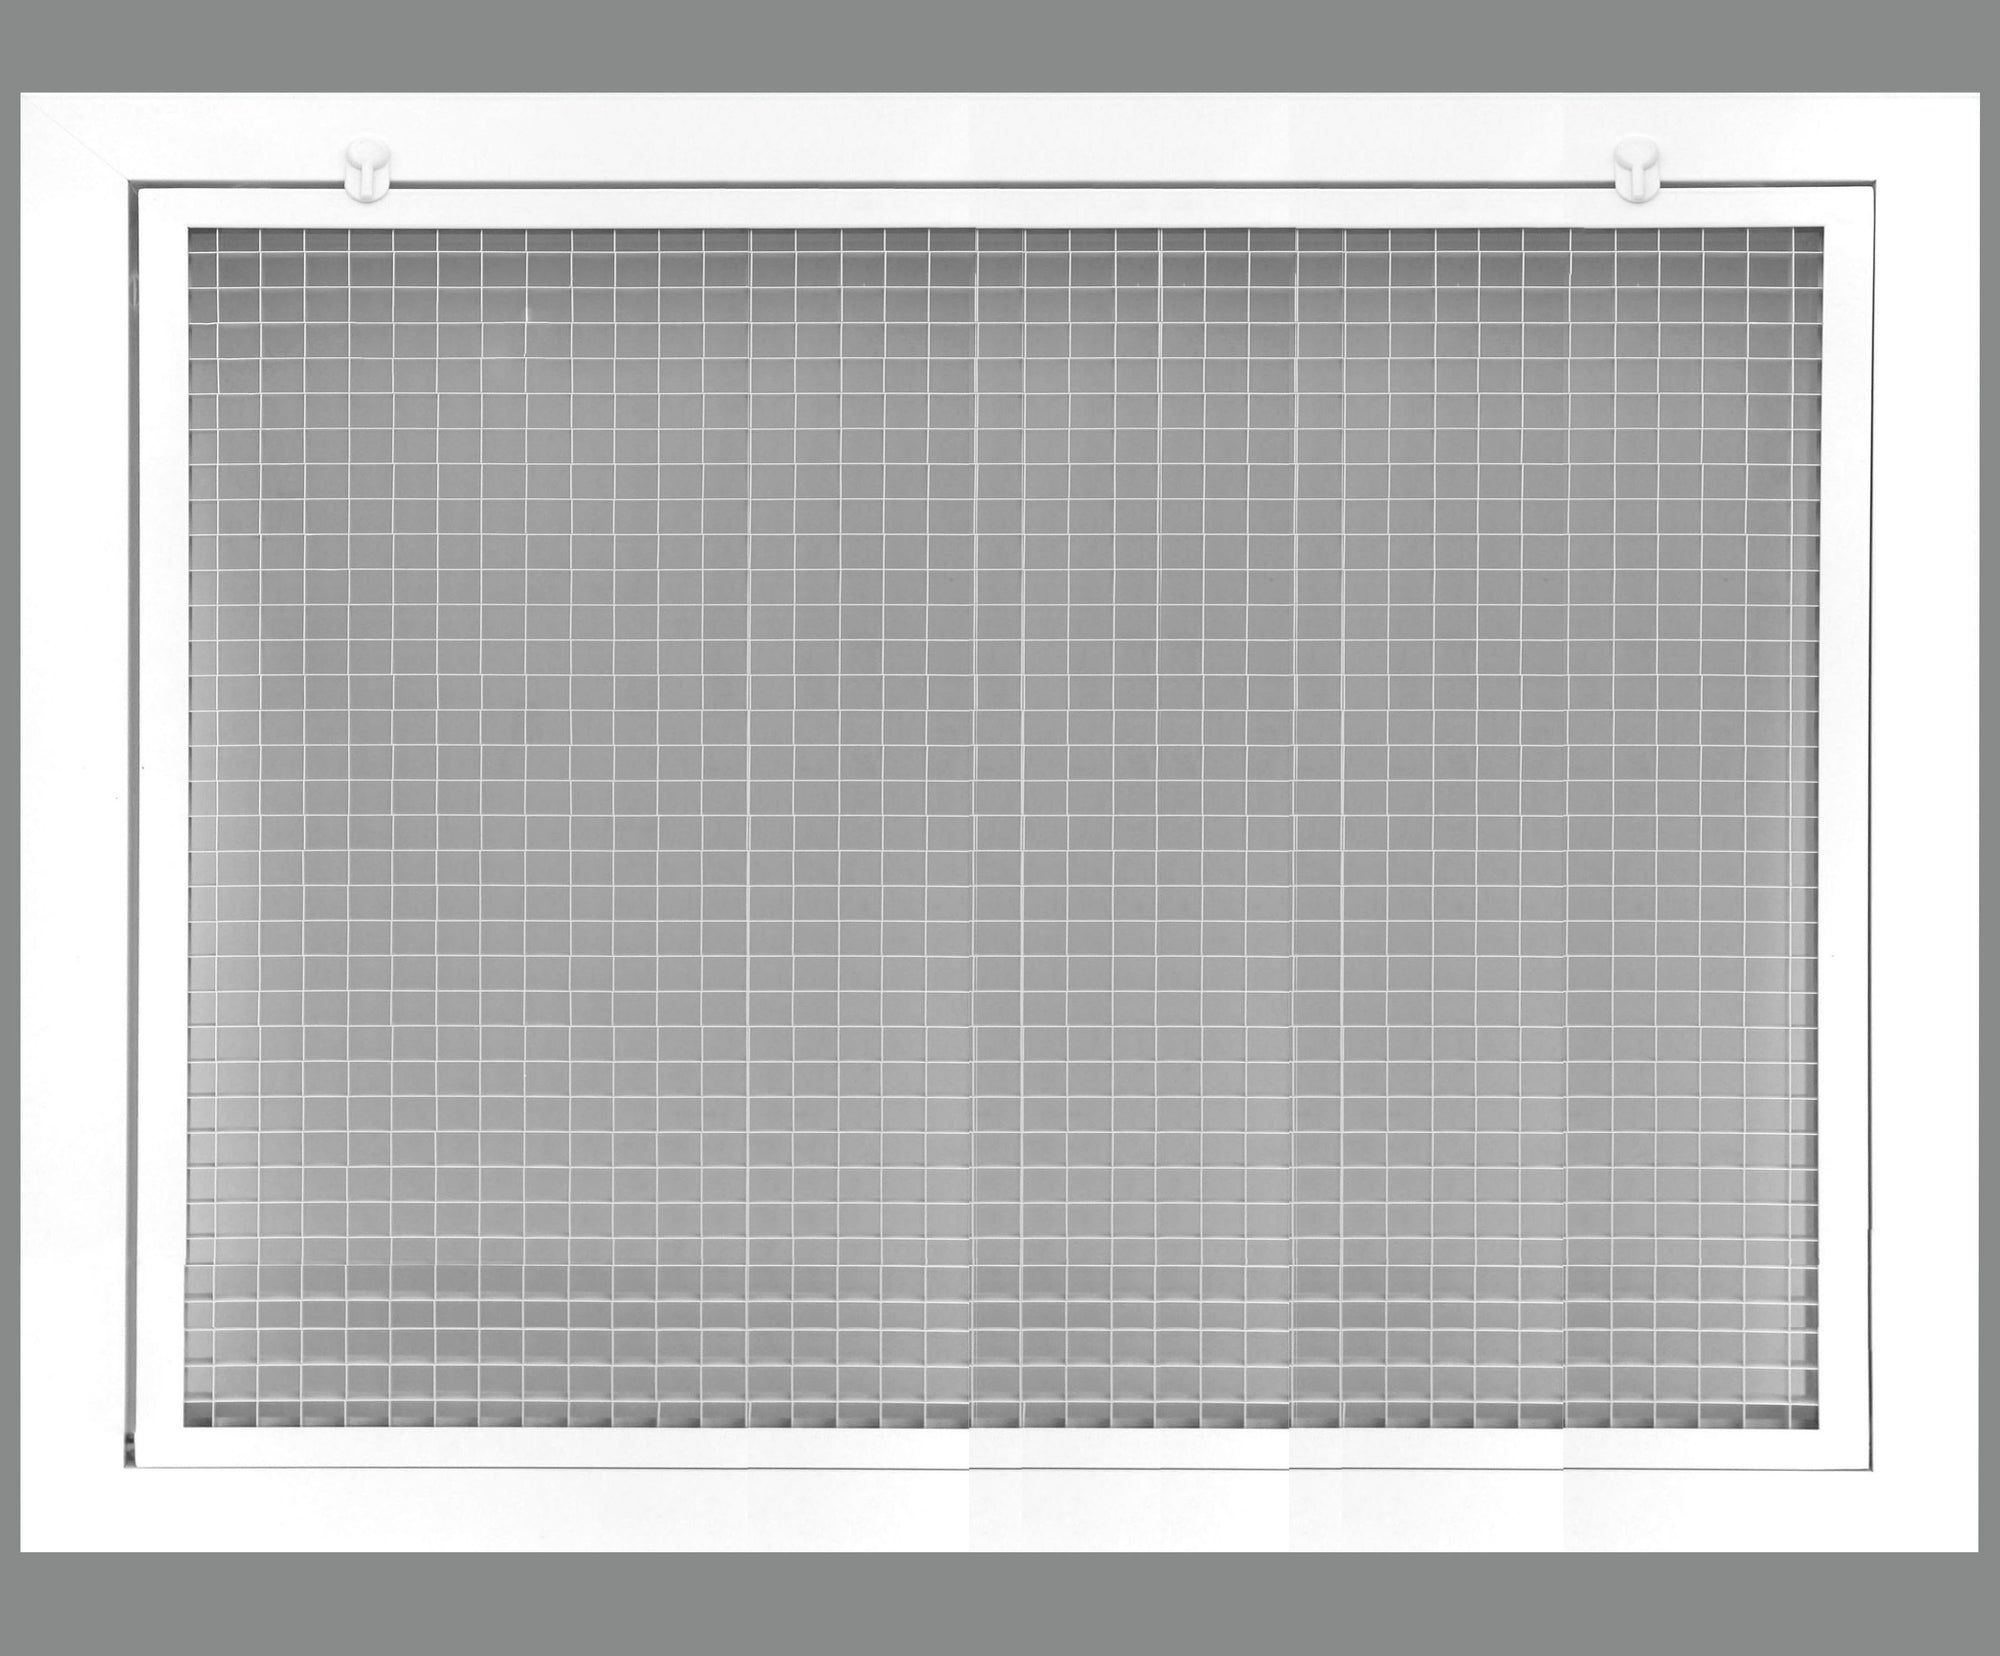 24" x 20" Cube Core Eggcrate Return Air Filter Grille for 1" Filter